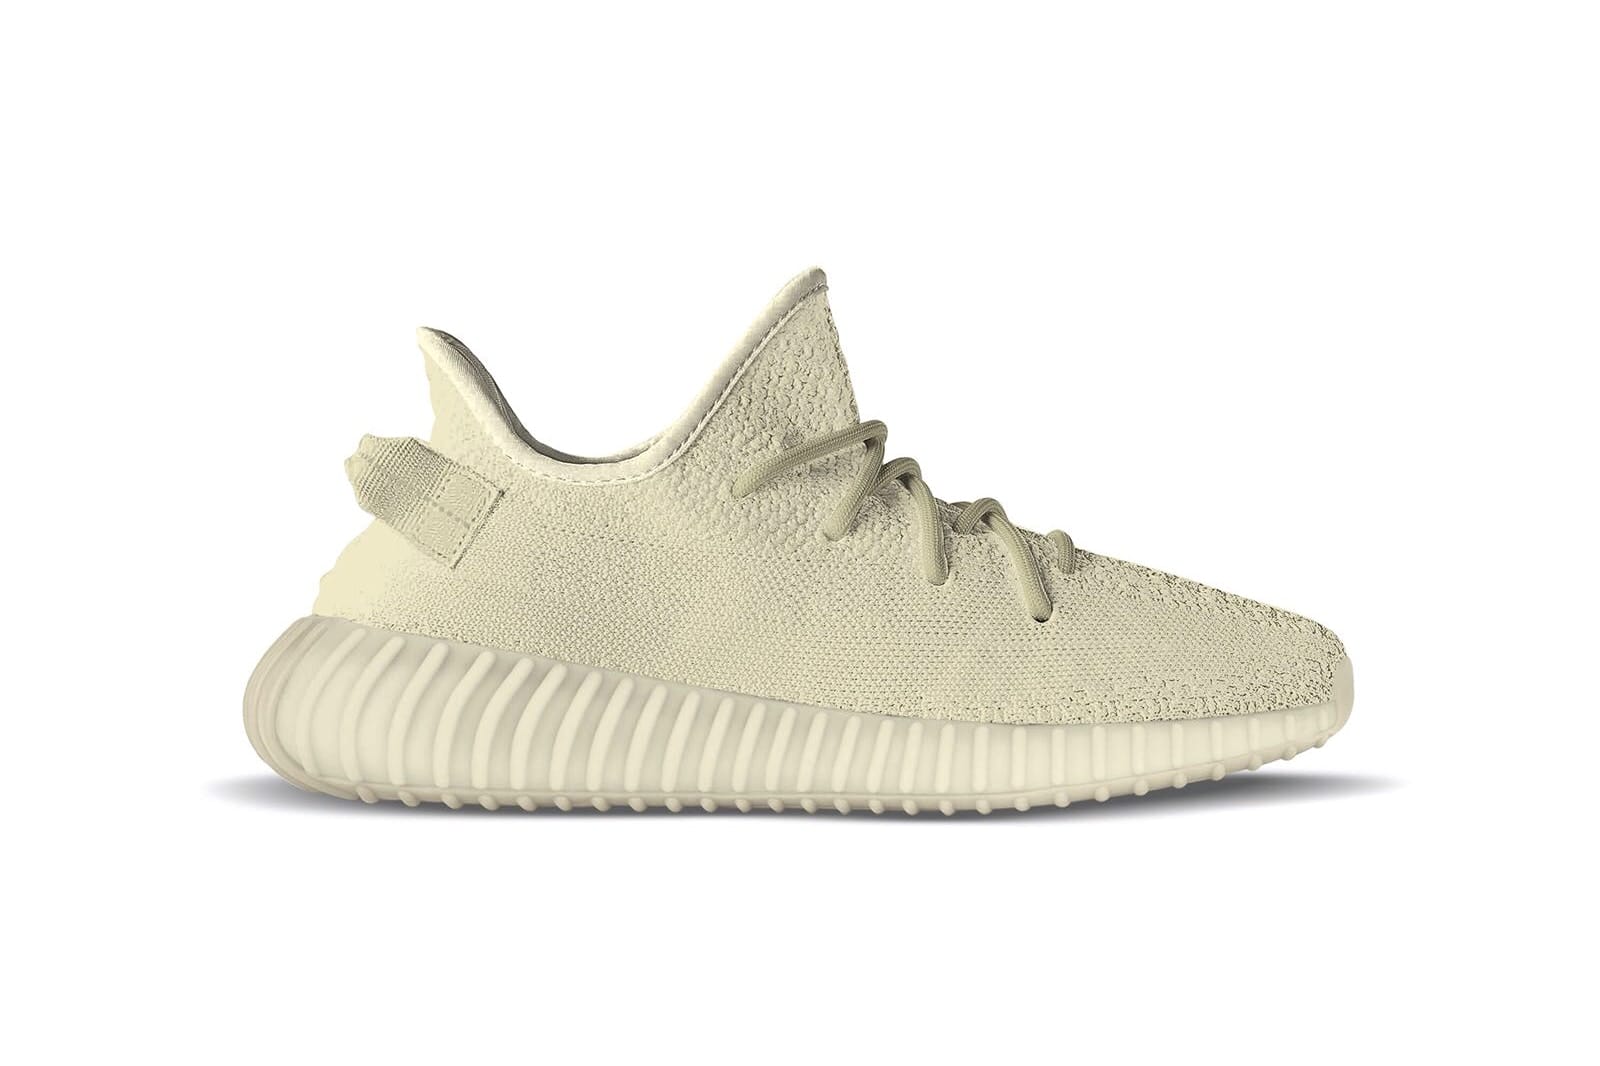 adidas YEEZY BOOST 350 V2 Surfaces in 